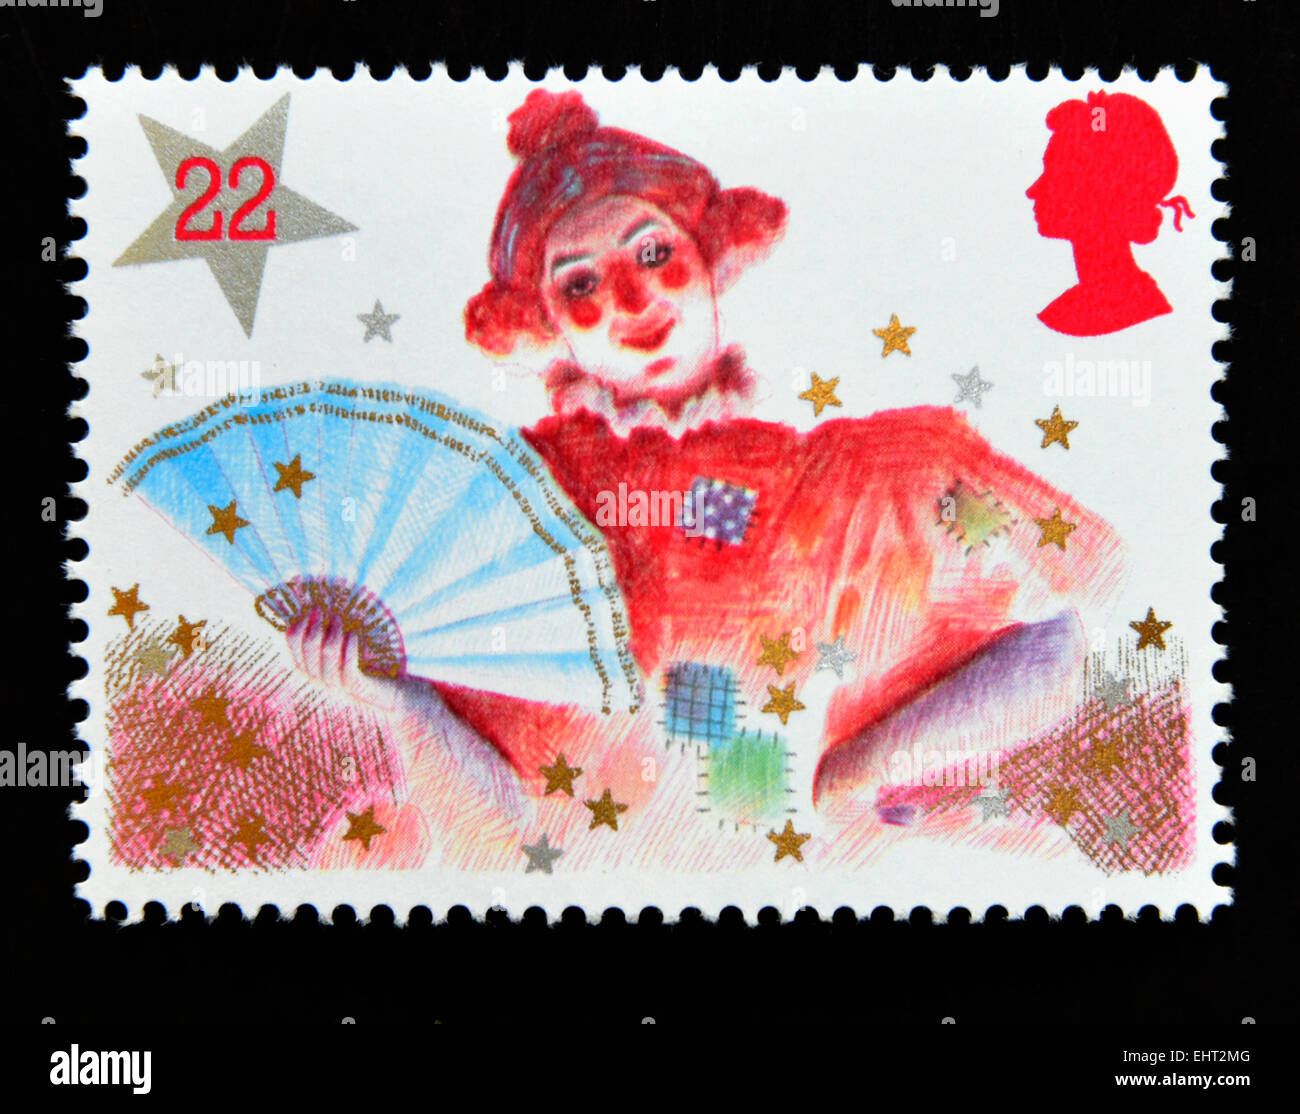 Postage stamp. Great Britain. Queen Elizabeth II. 1985. Christmas. Pantomime Characters. Dame. 22p. Stock Photo